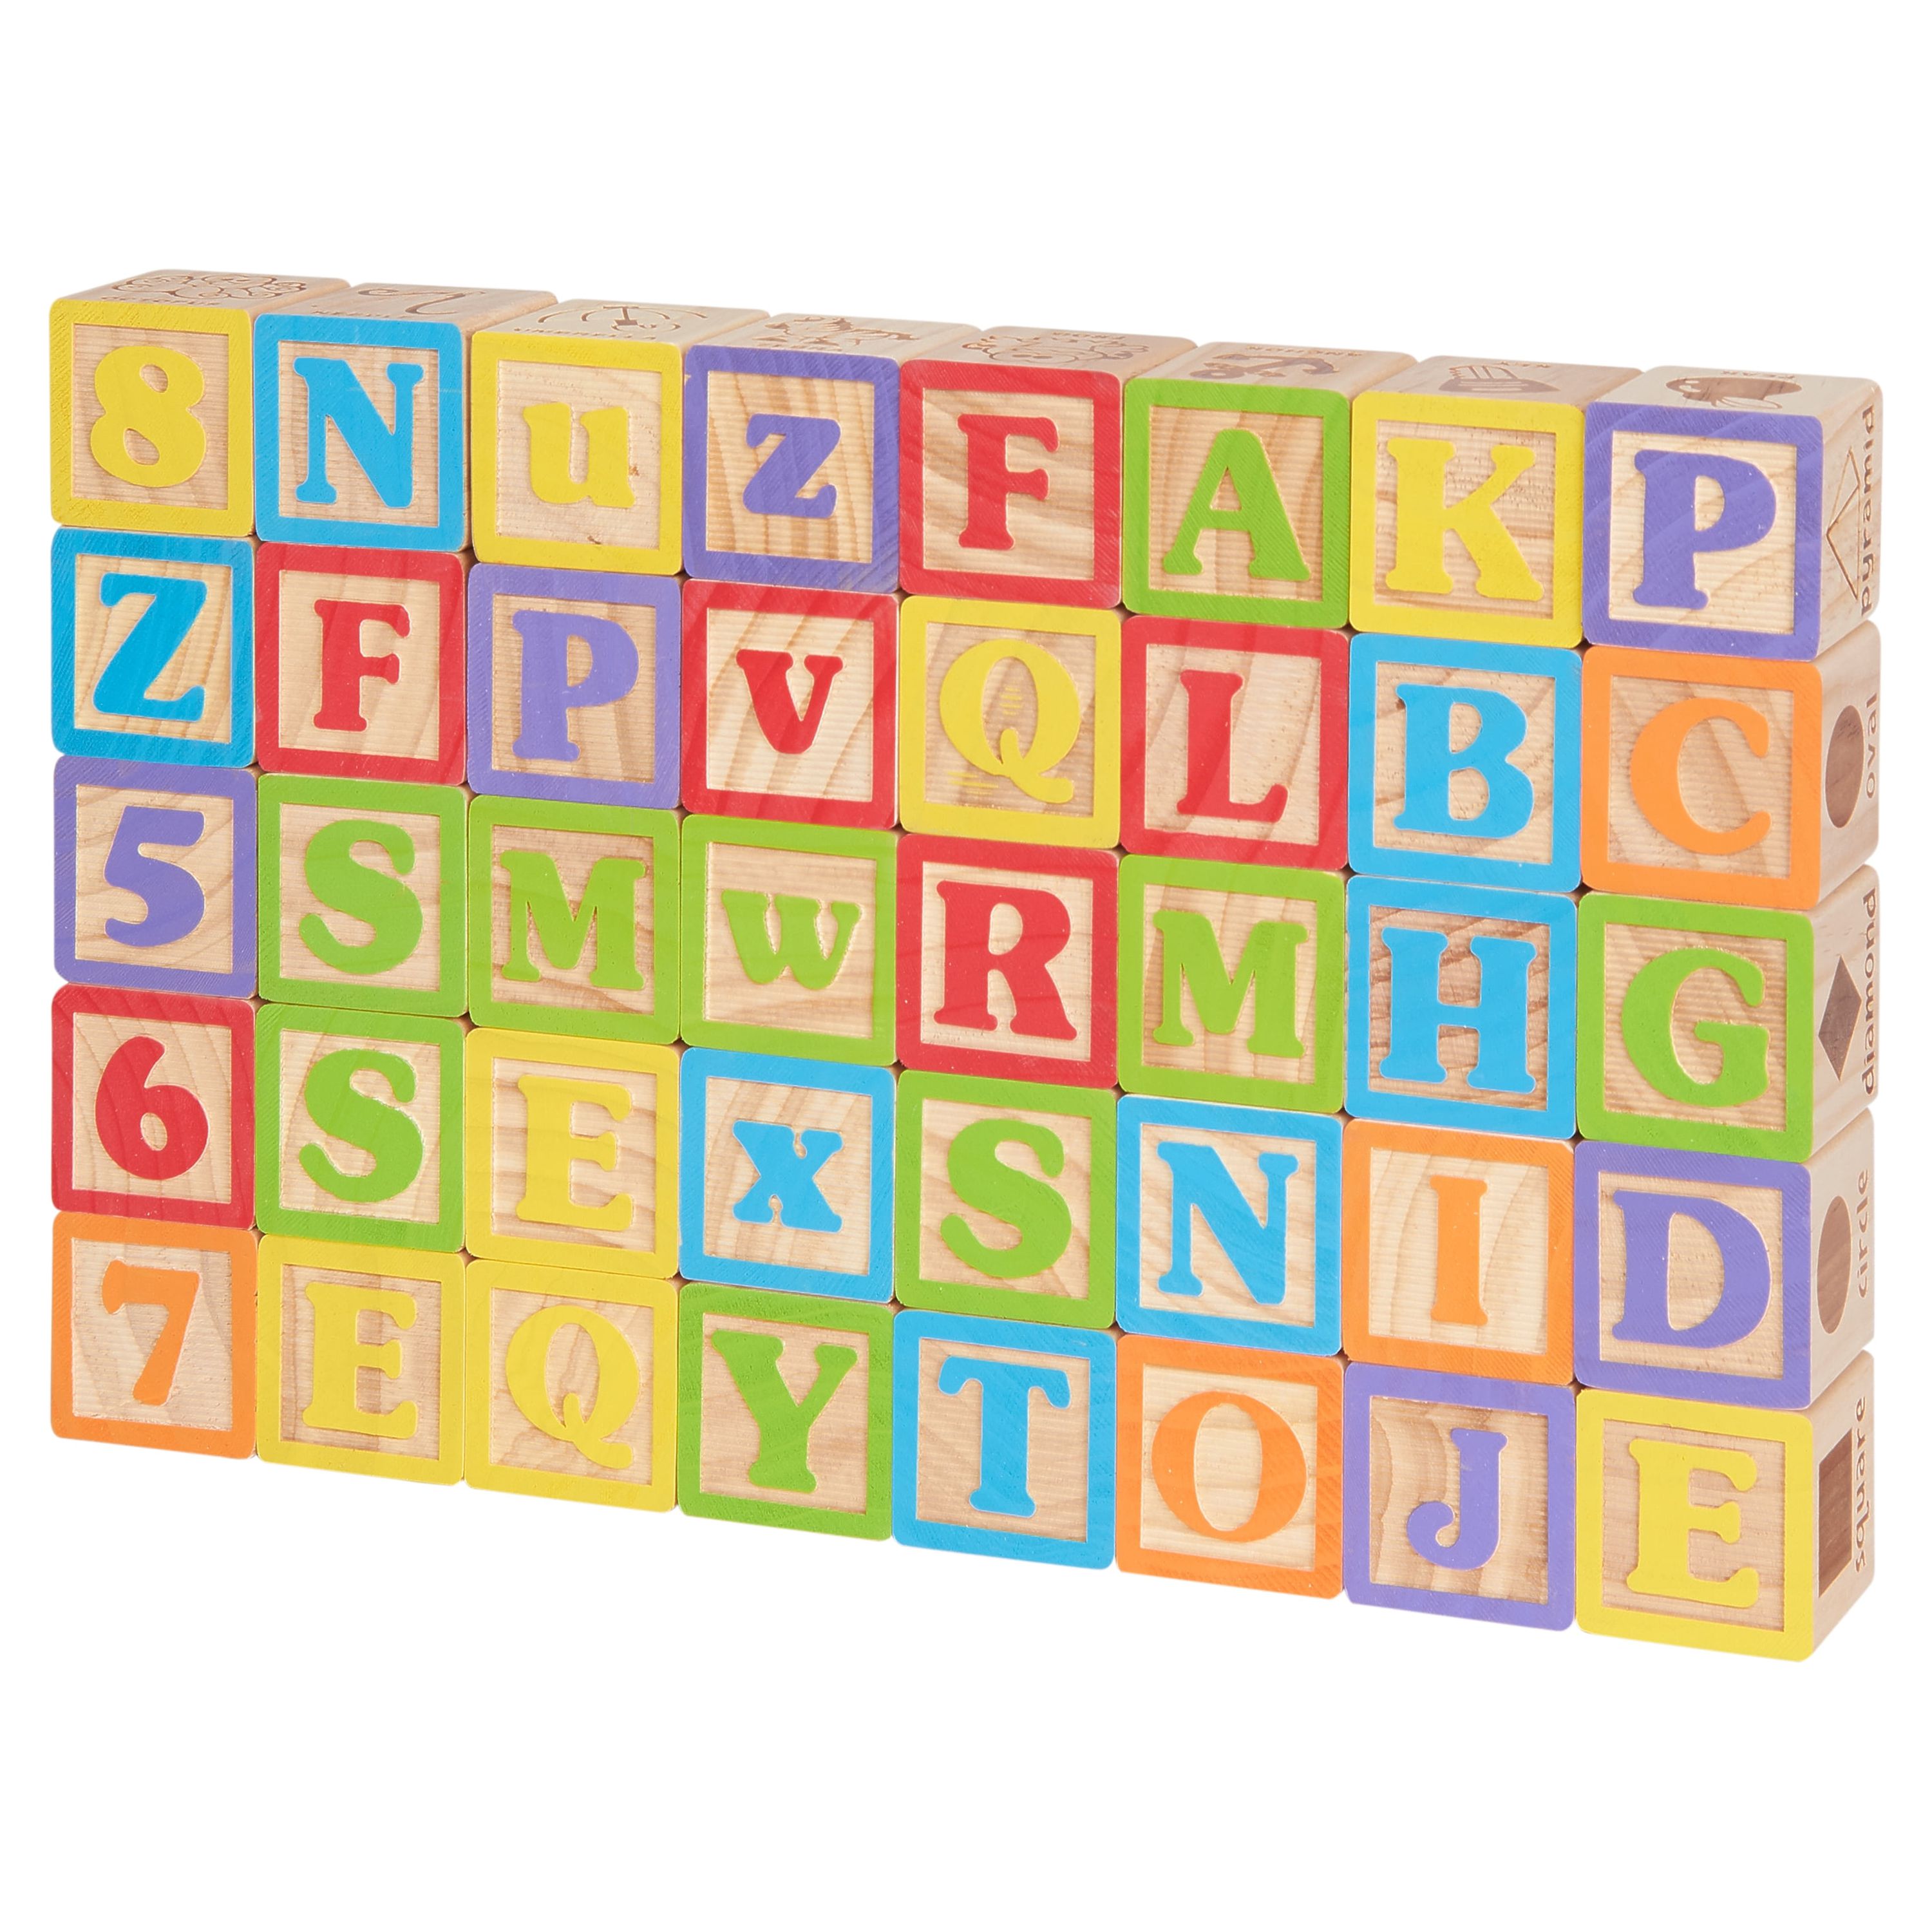 Spark. Create. Imagine 40 Piece ABC Alphabet toy with wooden blocks with bright graphics - image 1 of 9